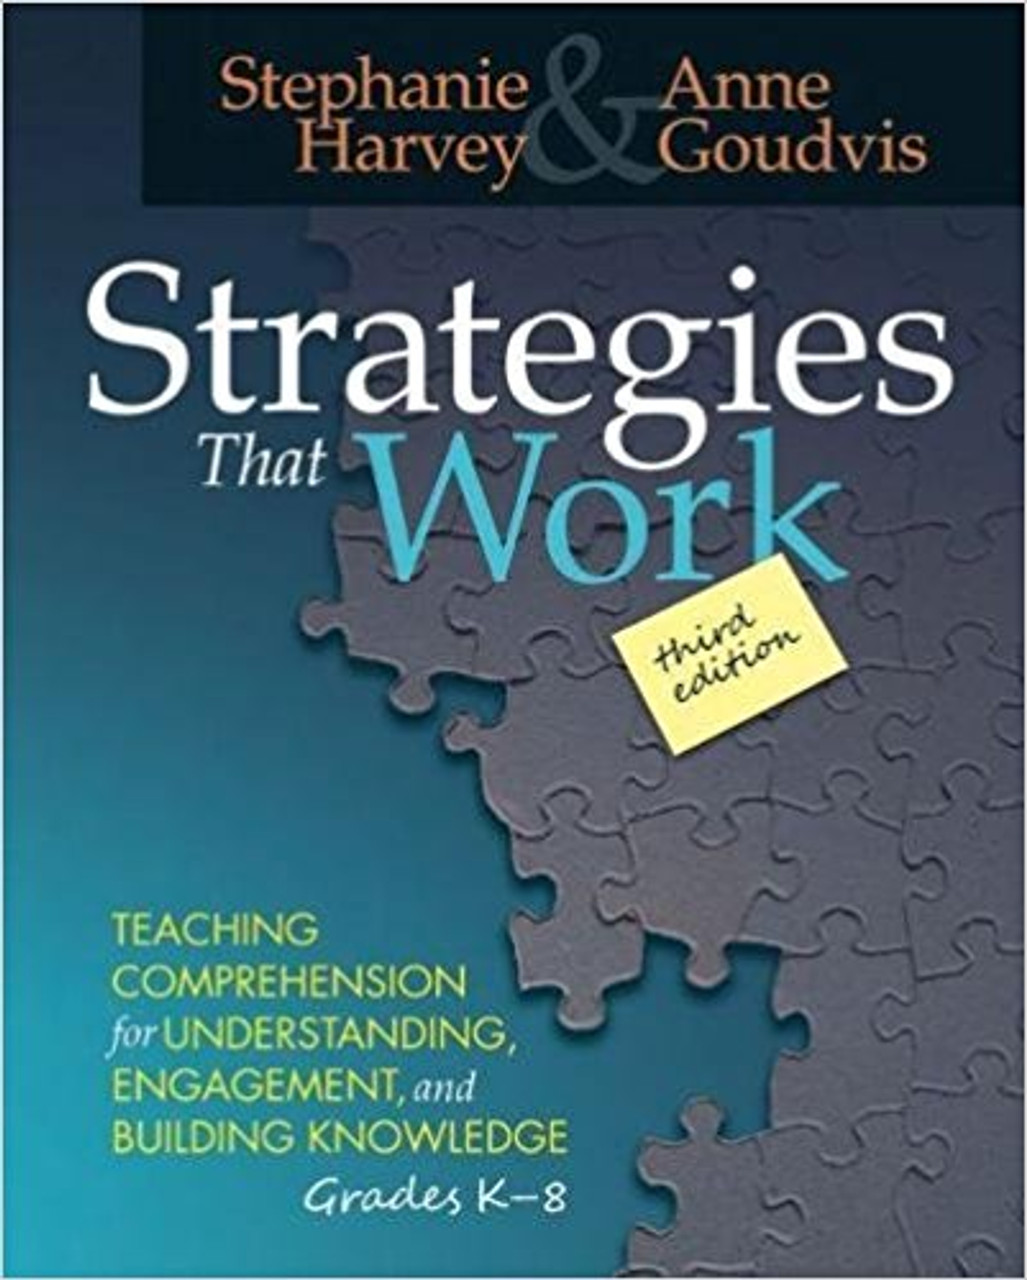 Strategies That Work, 3rd Edition: Teaching Comprehension for Engagement, Understanding, and Building Knowledge, Grades K-8 by Stephanie Harvey